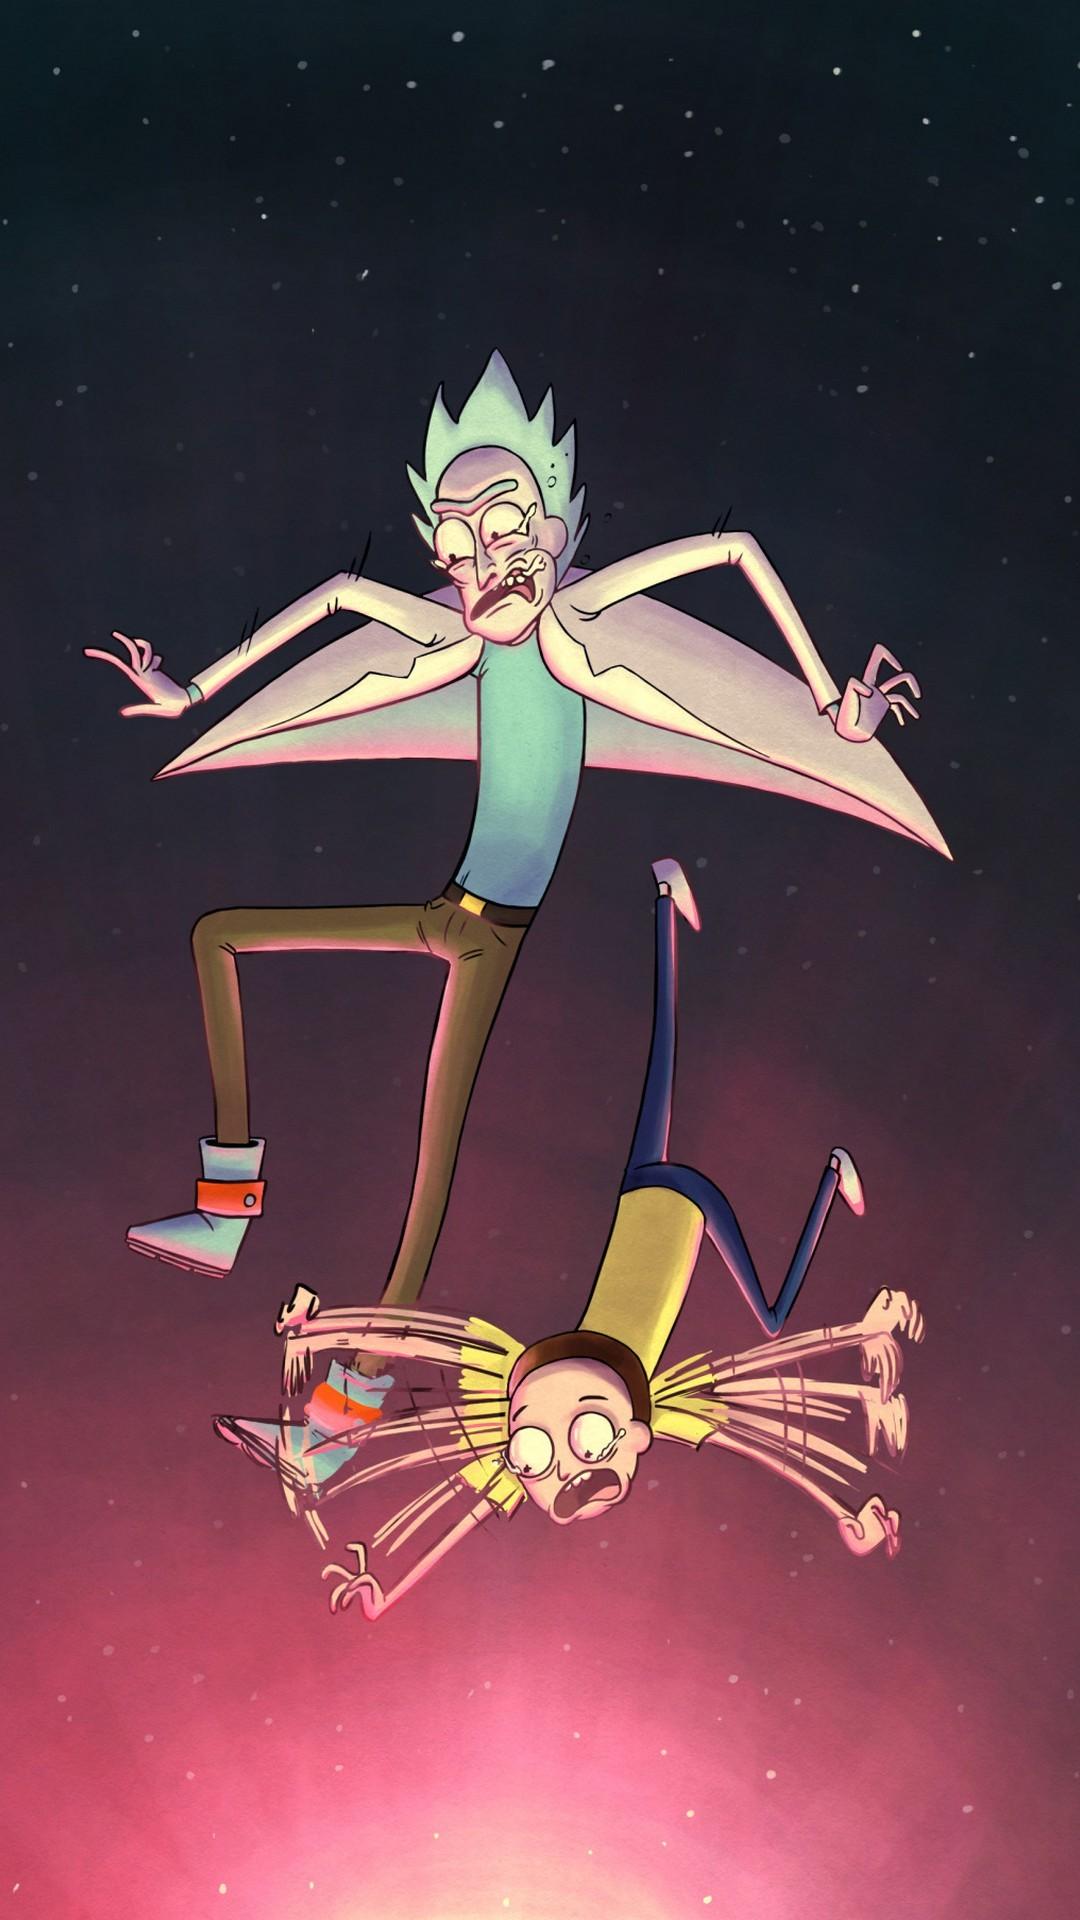 Rick and Morty HD Wallpaper For iPhone Cute Wallpaper